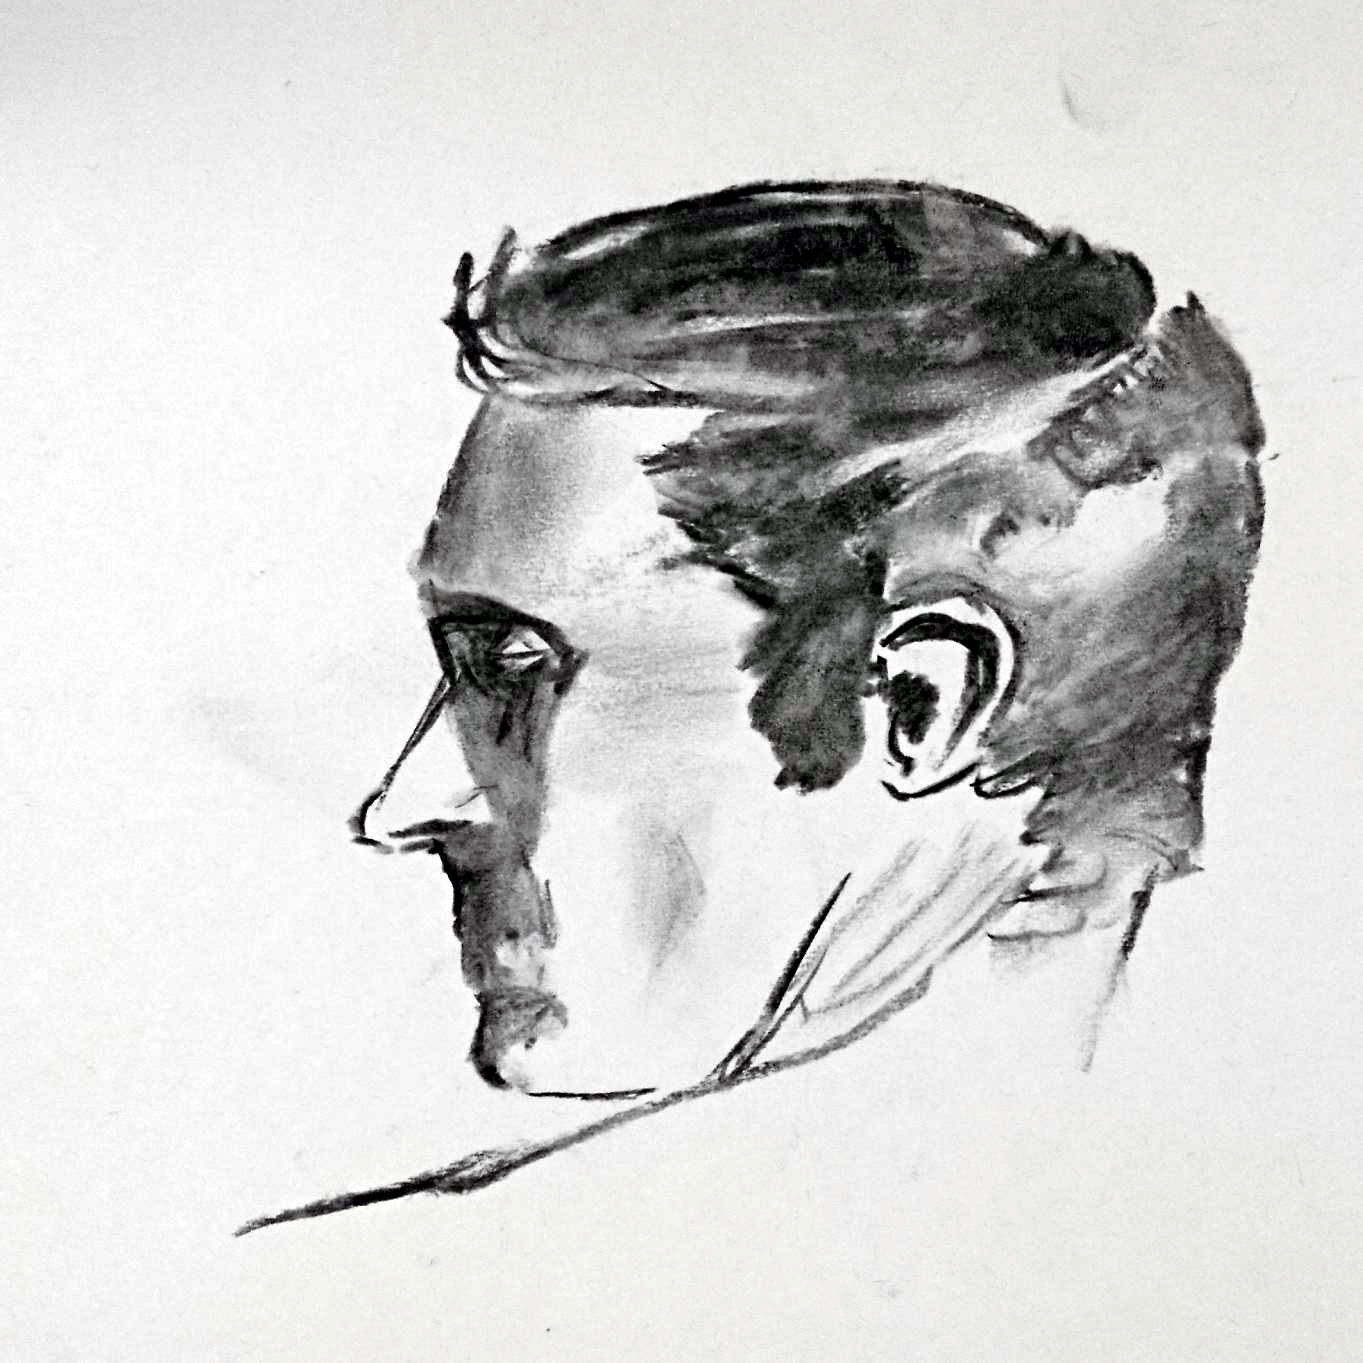 charcoal drawing of a man's face looking to the left